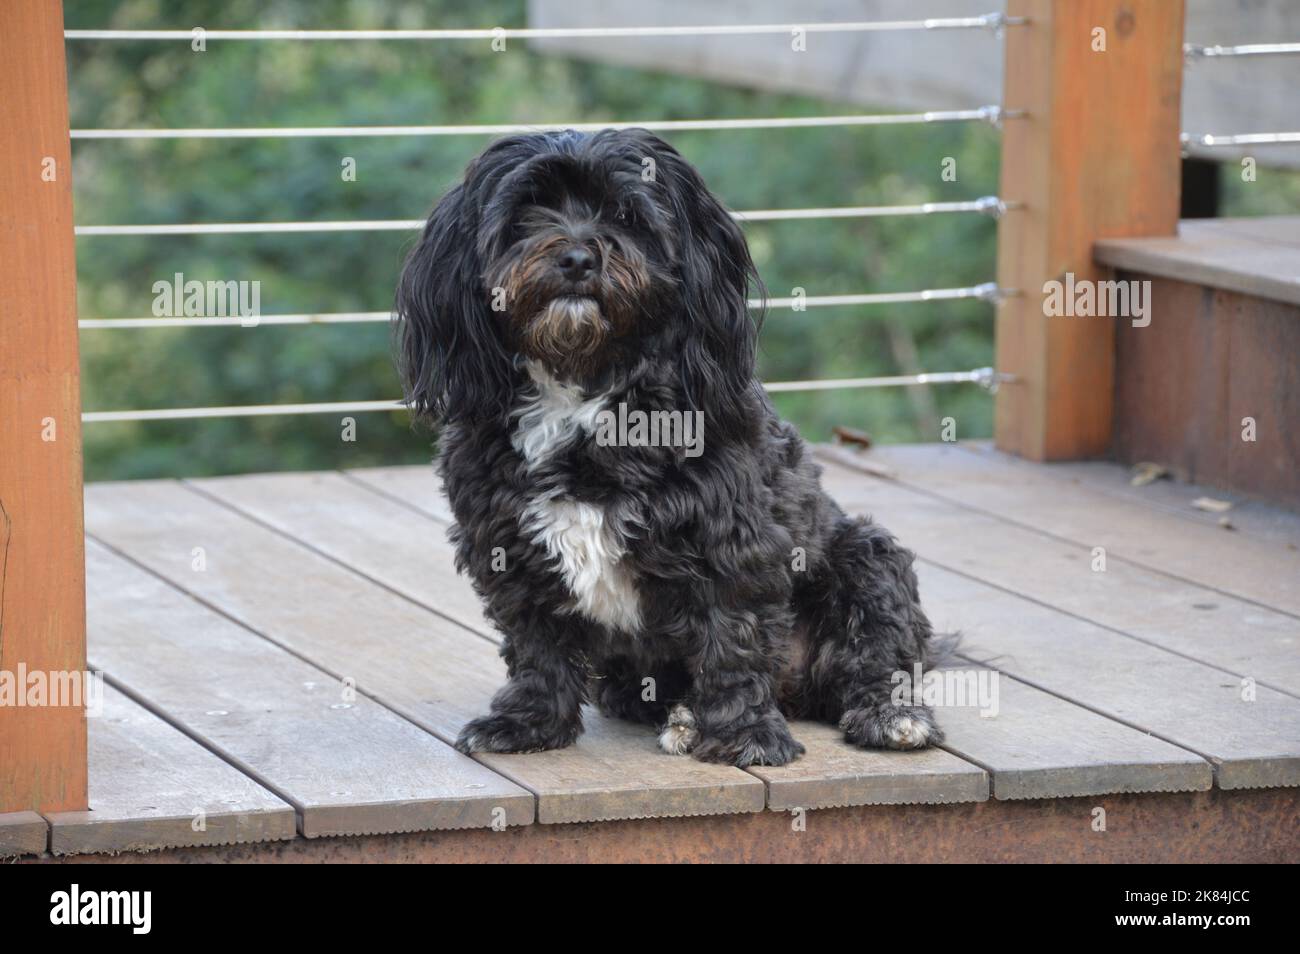 Sooty the black and white Maltese x poodle sitting up straight at home on our balcony Stock Photo